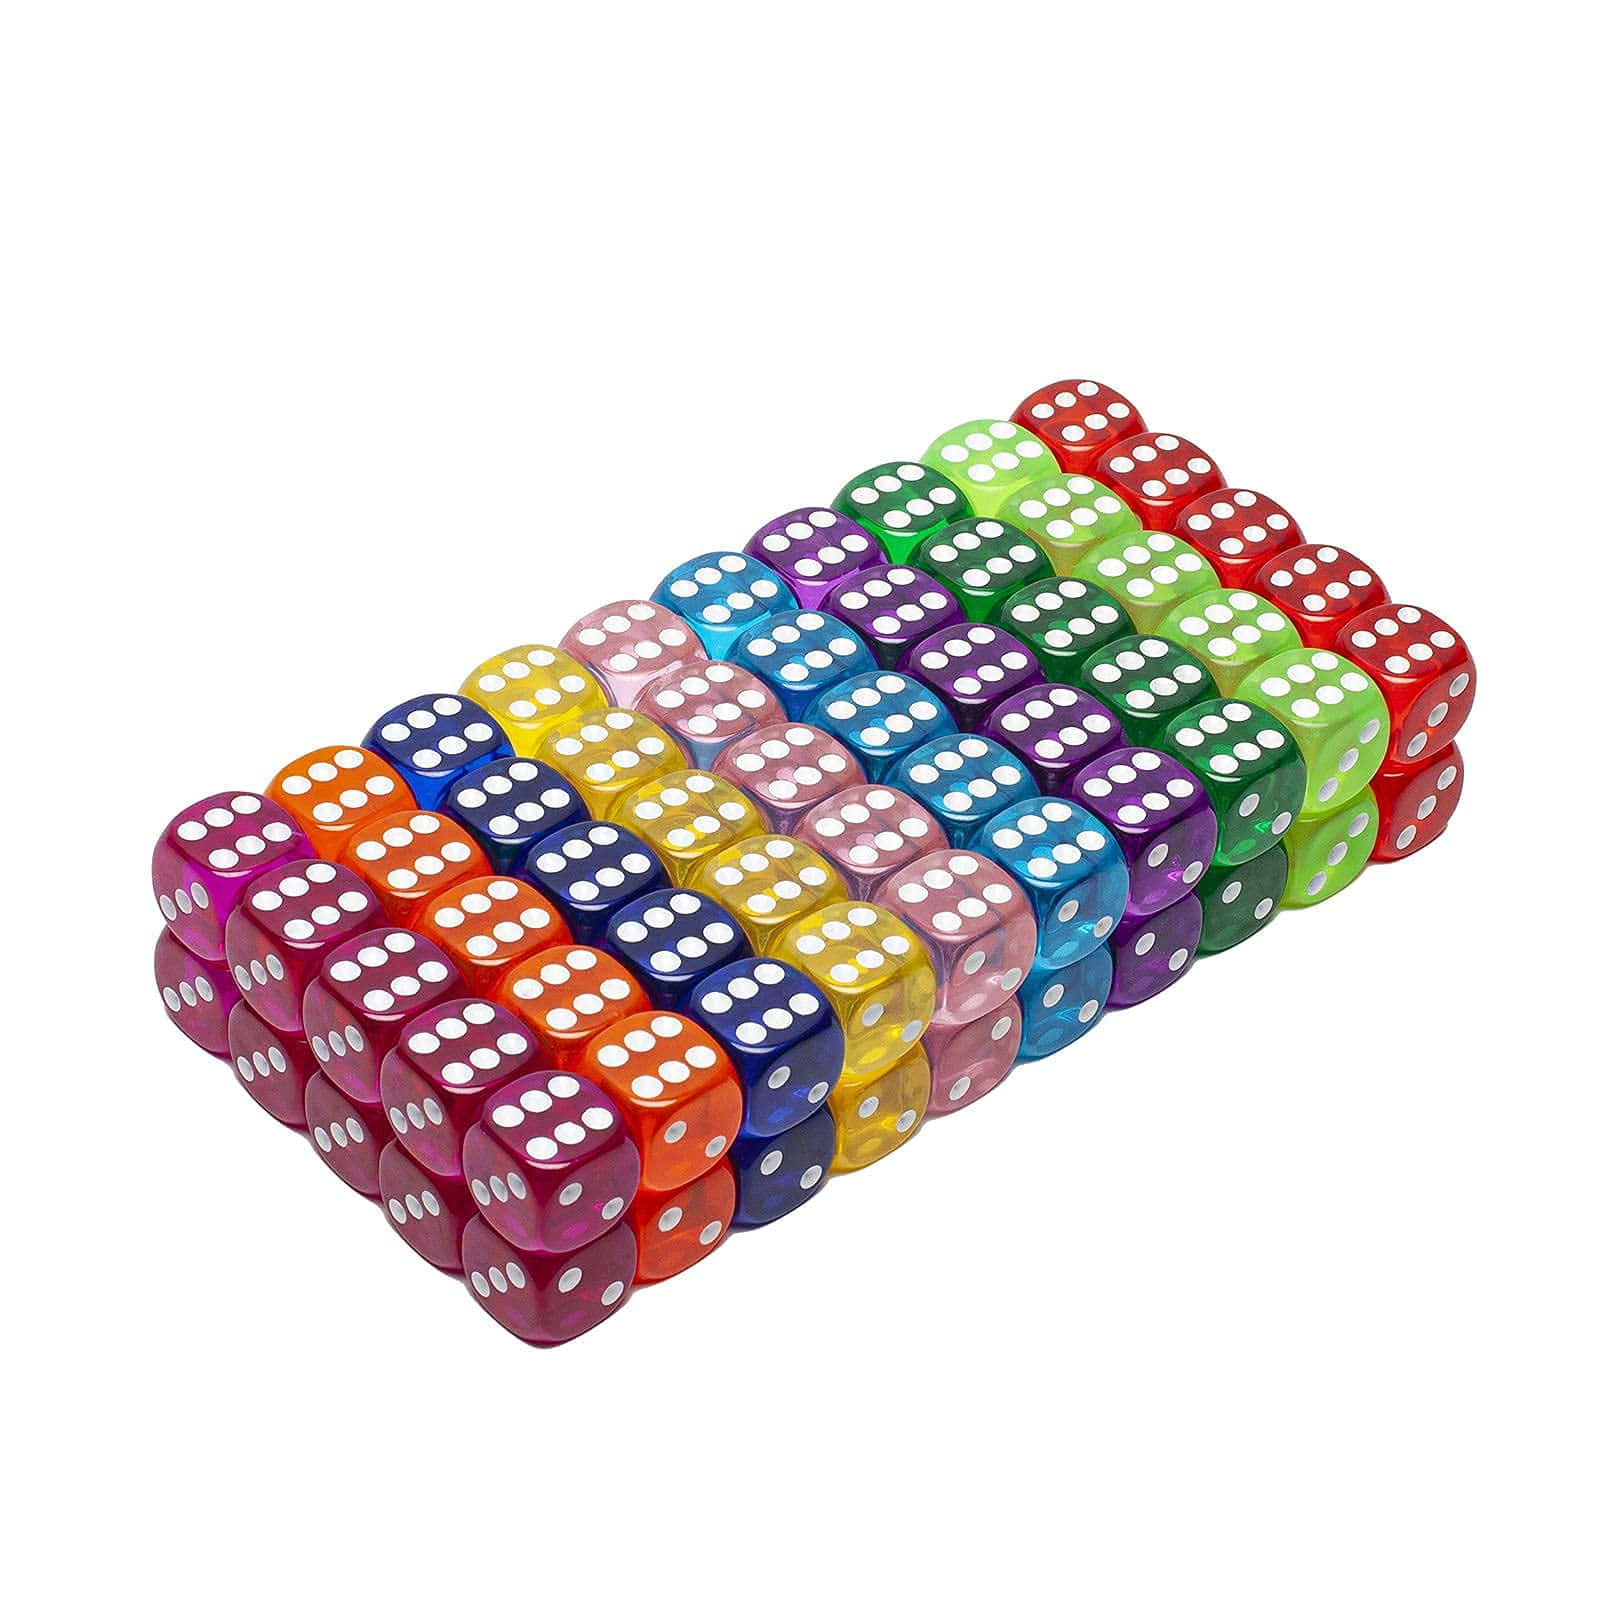 A Colorful Set Of Dice With Different Colors